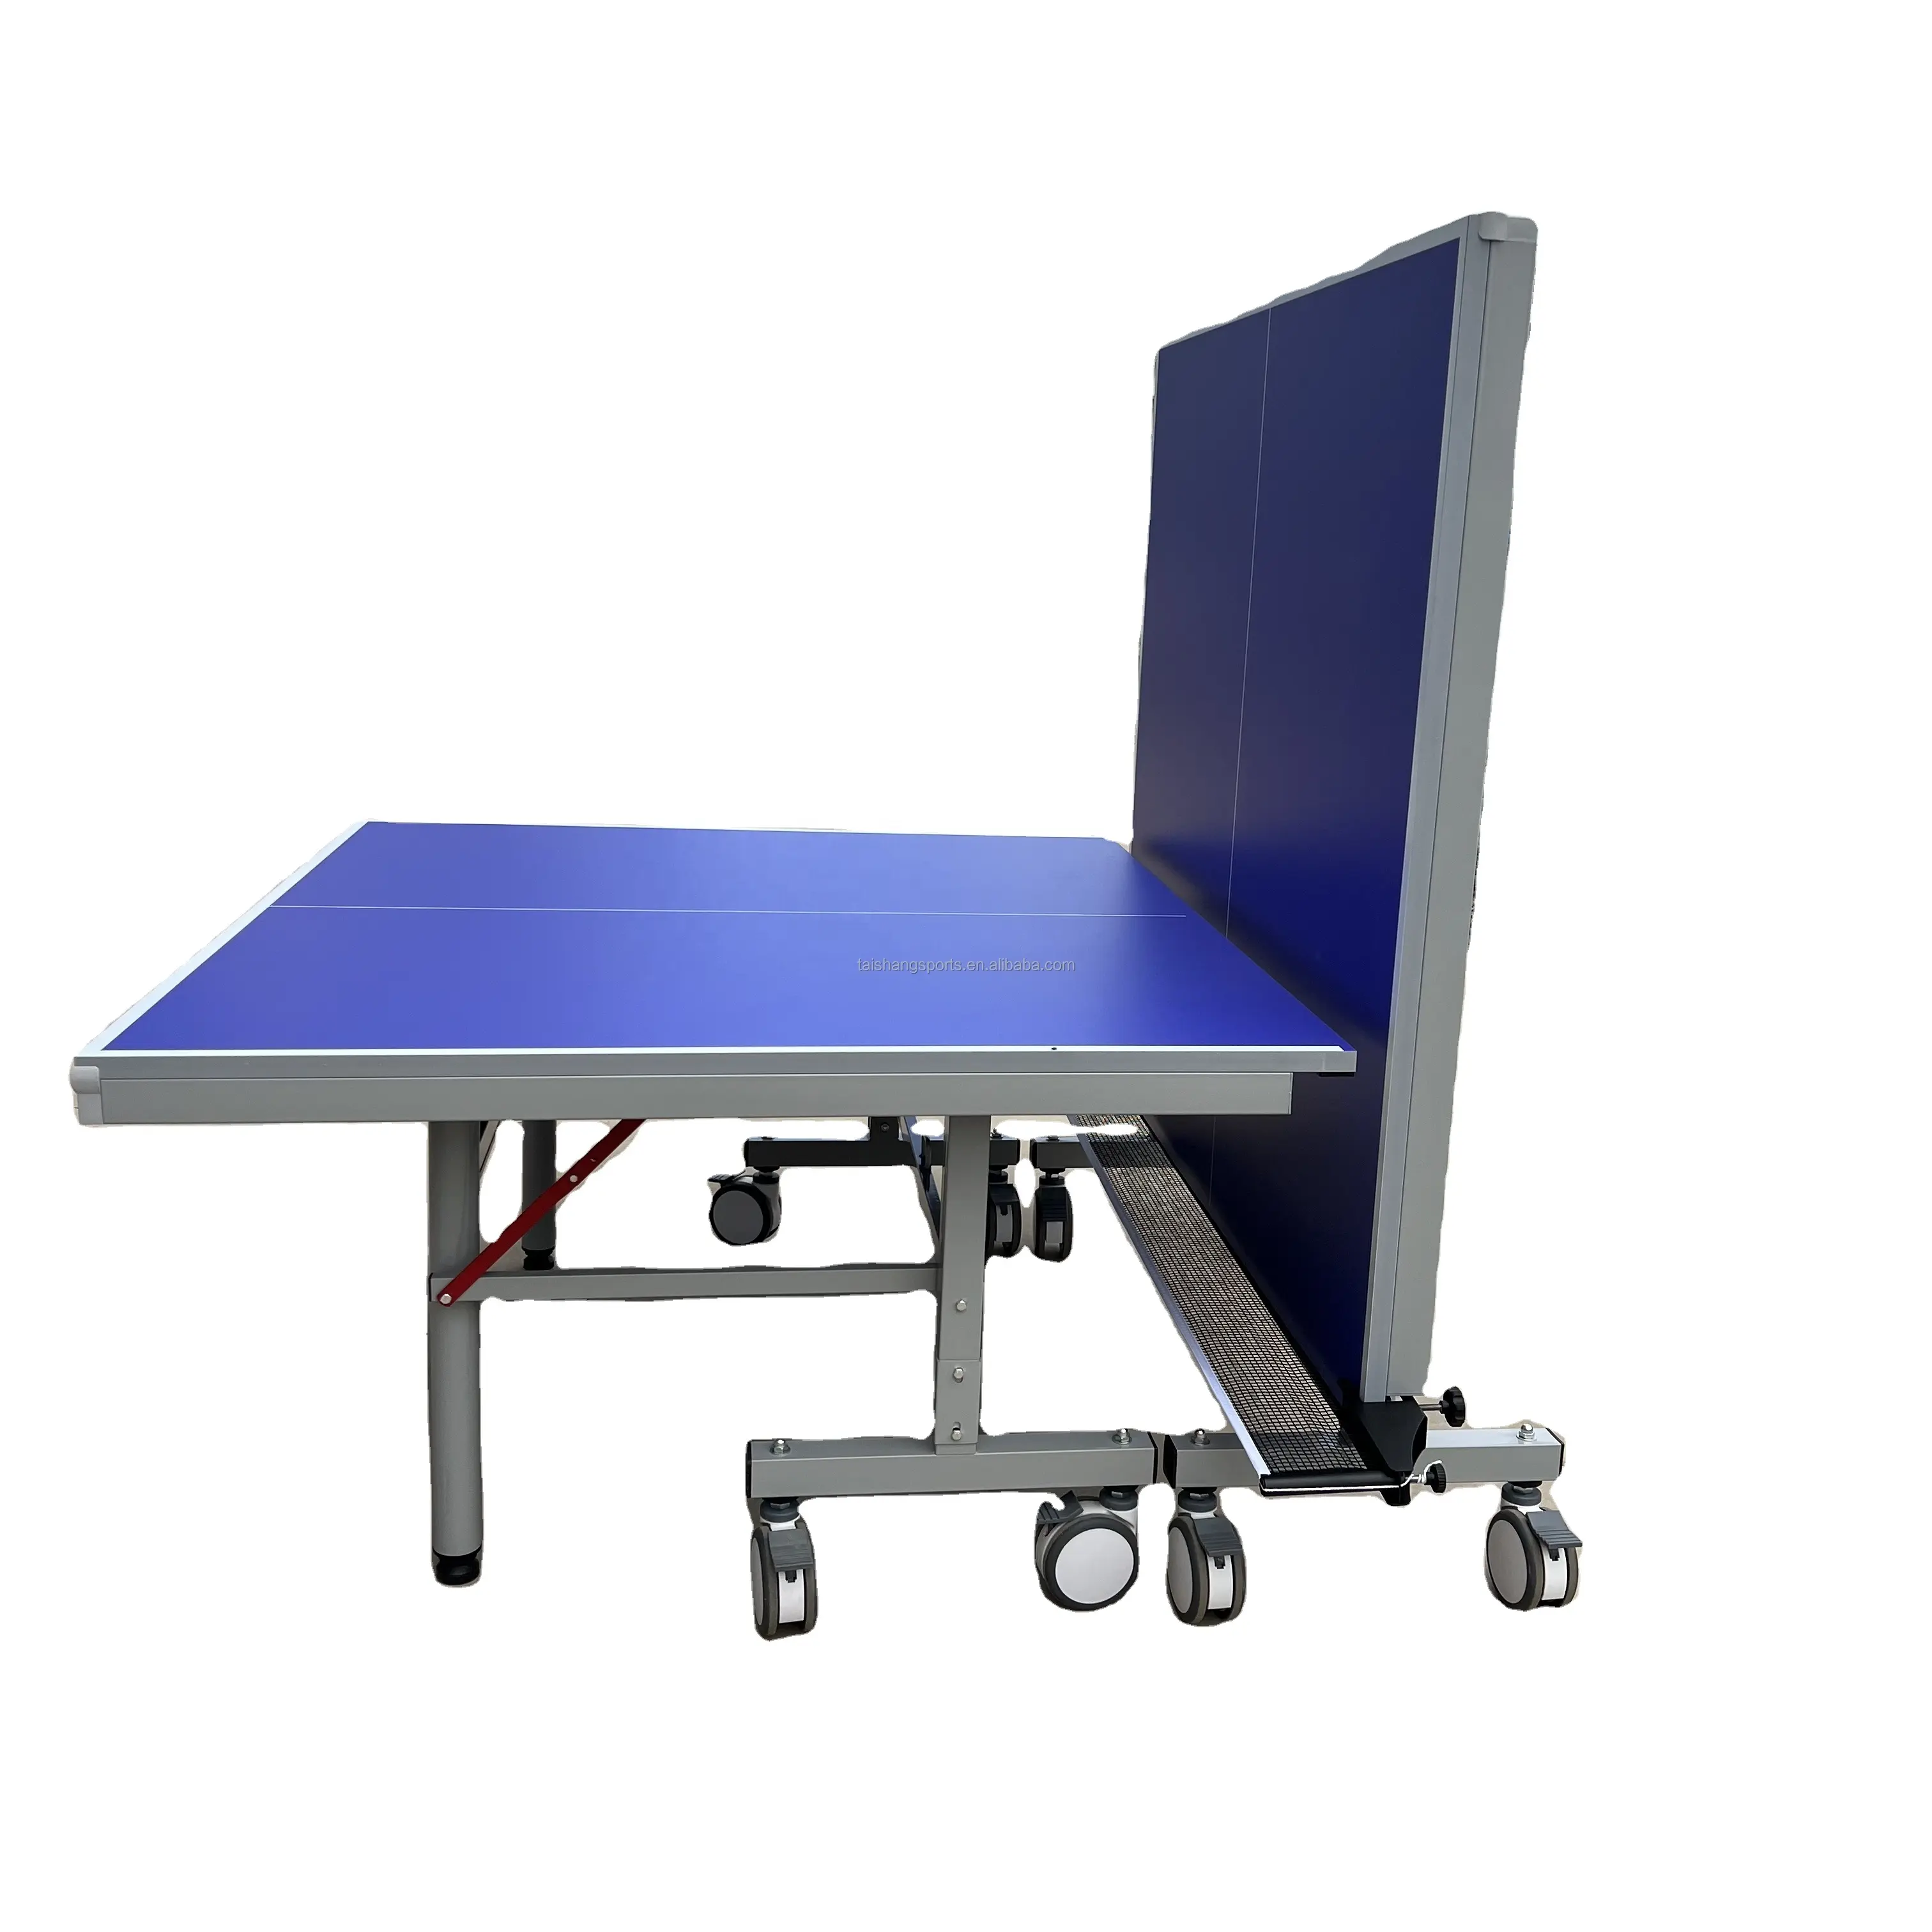 25mm MDF Blue Top Table Tennis Table With Medical Wheels Tournament quality